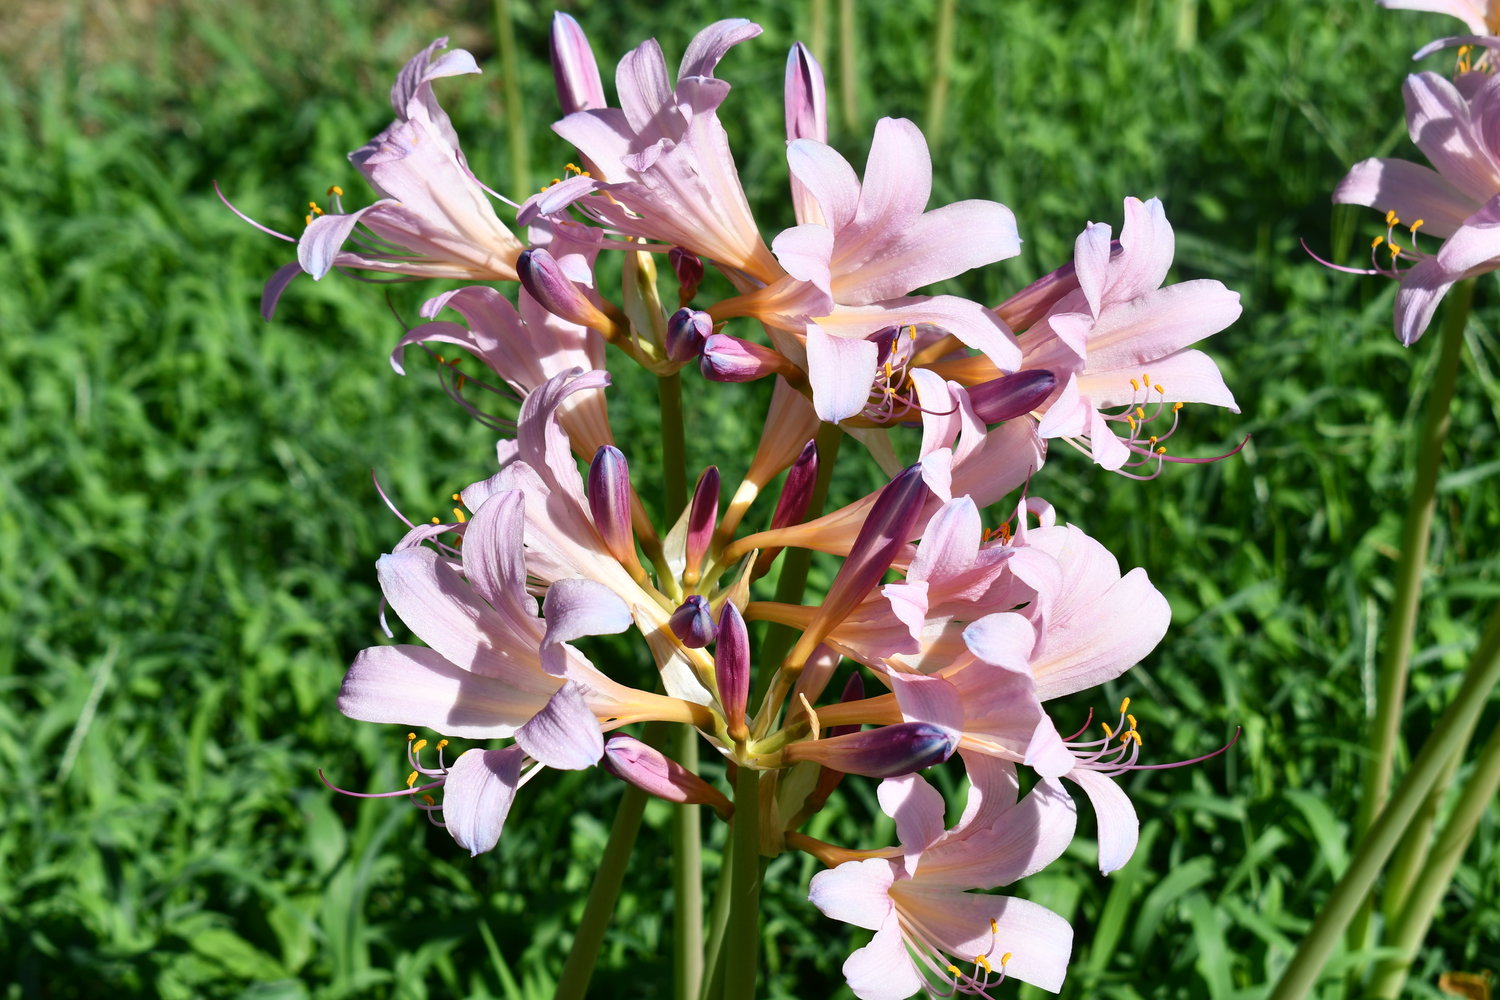 It’s that time of year for the Naked Ladies to surprise everyone as they appear in many yards with summertime colors to show off.